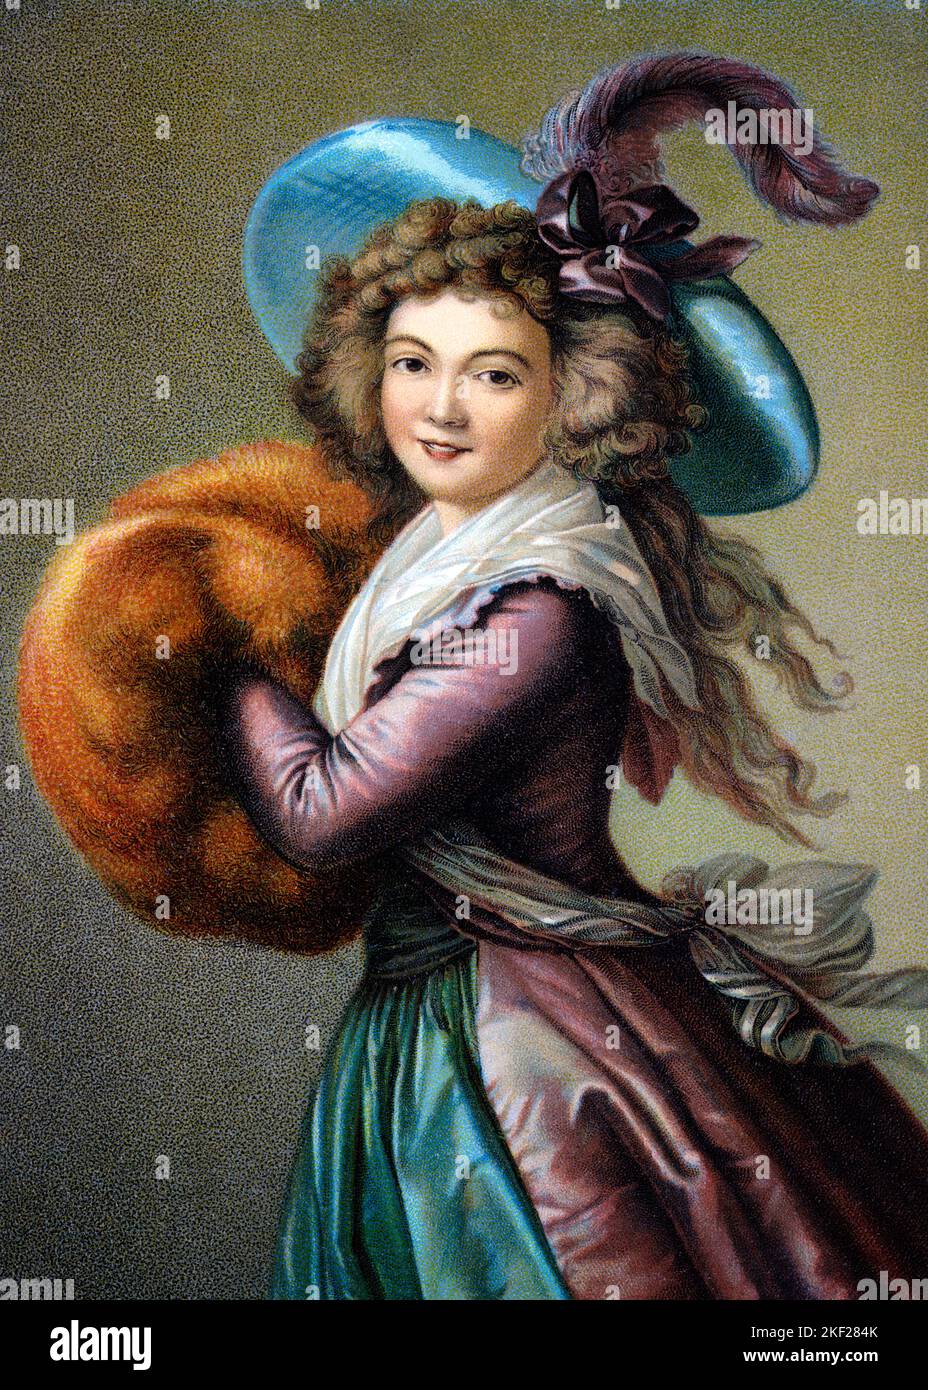 1780s MADAM MOLE RAYMOND A FASHIONABLE ACTRESS  CARRYING FUR MUFF BIG HAT WITH FEATHER BY ELISABETH VIGEE LE BRUN FRENCH PAINTER - ka9391 HAR001 HARS POSTCARD STYLISH LE ELISABETH VIGEE LE BRUN FASHIONS ROCOCO YOUNG ADULT WOMAN 1780s CAUCASIAN ETHNICITY HAR001 OLD FASHIONED Stock Photo